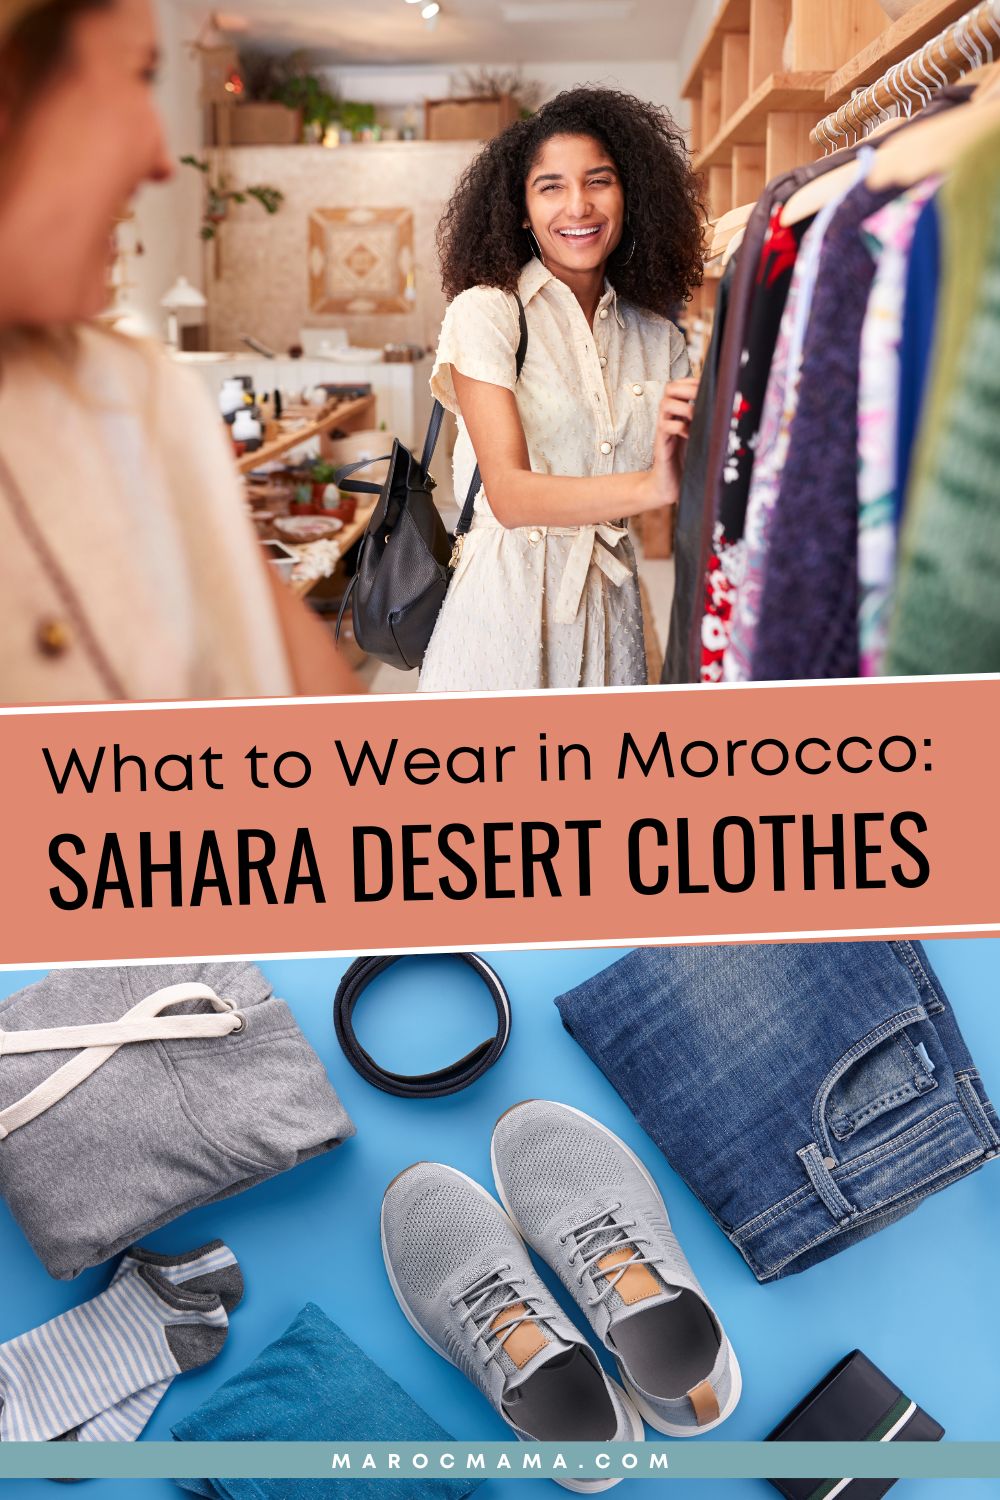 Top image, Women Shopping in Clothing Store and bottom image, Men's clothes flat lay with the text What to Wear in Morocco: Sahara Desert Clothes